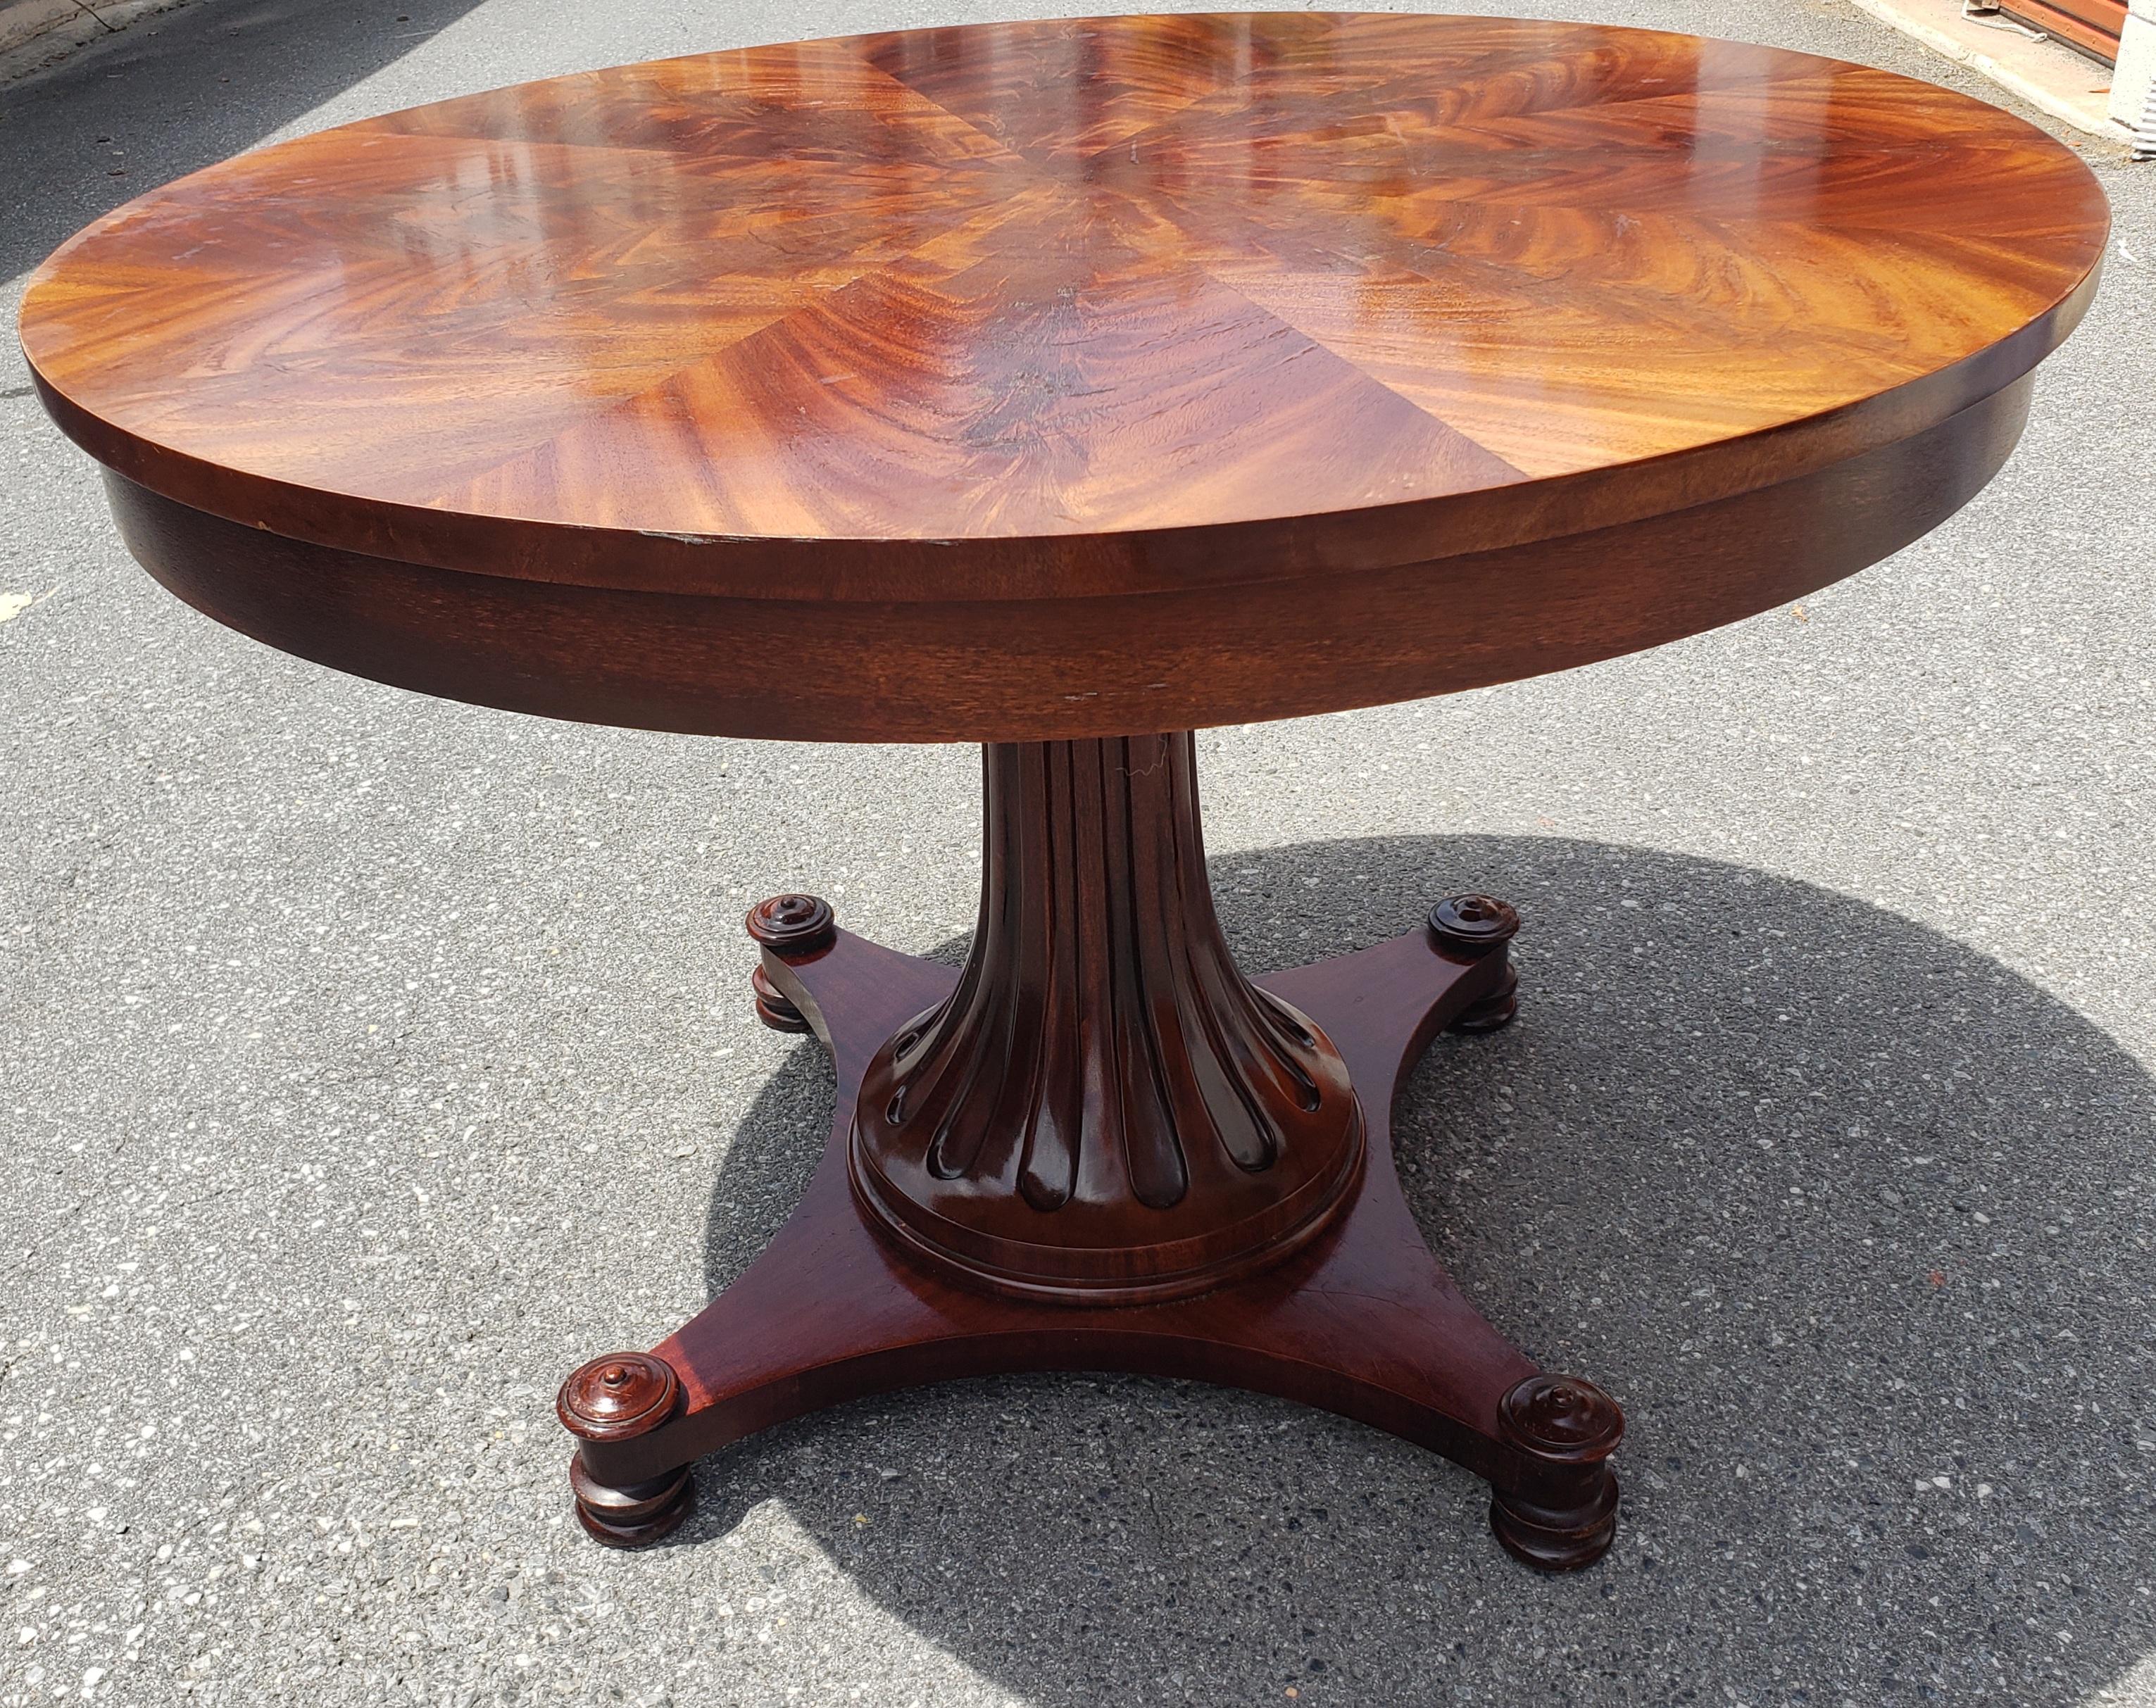 George III Late 20th Century Swirl Mahogany Breakfast Table or Center Table